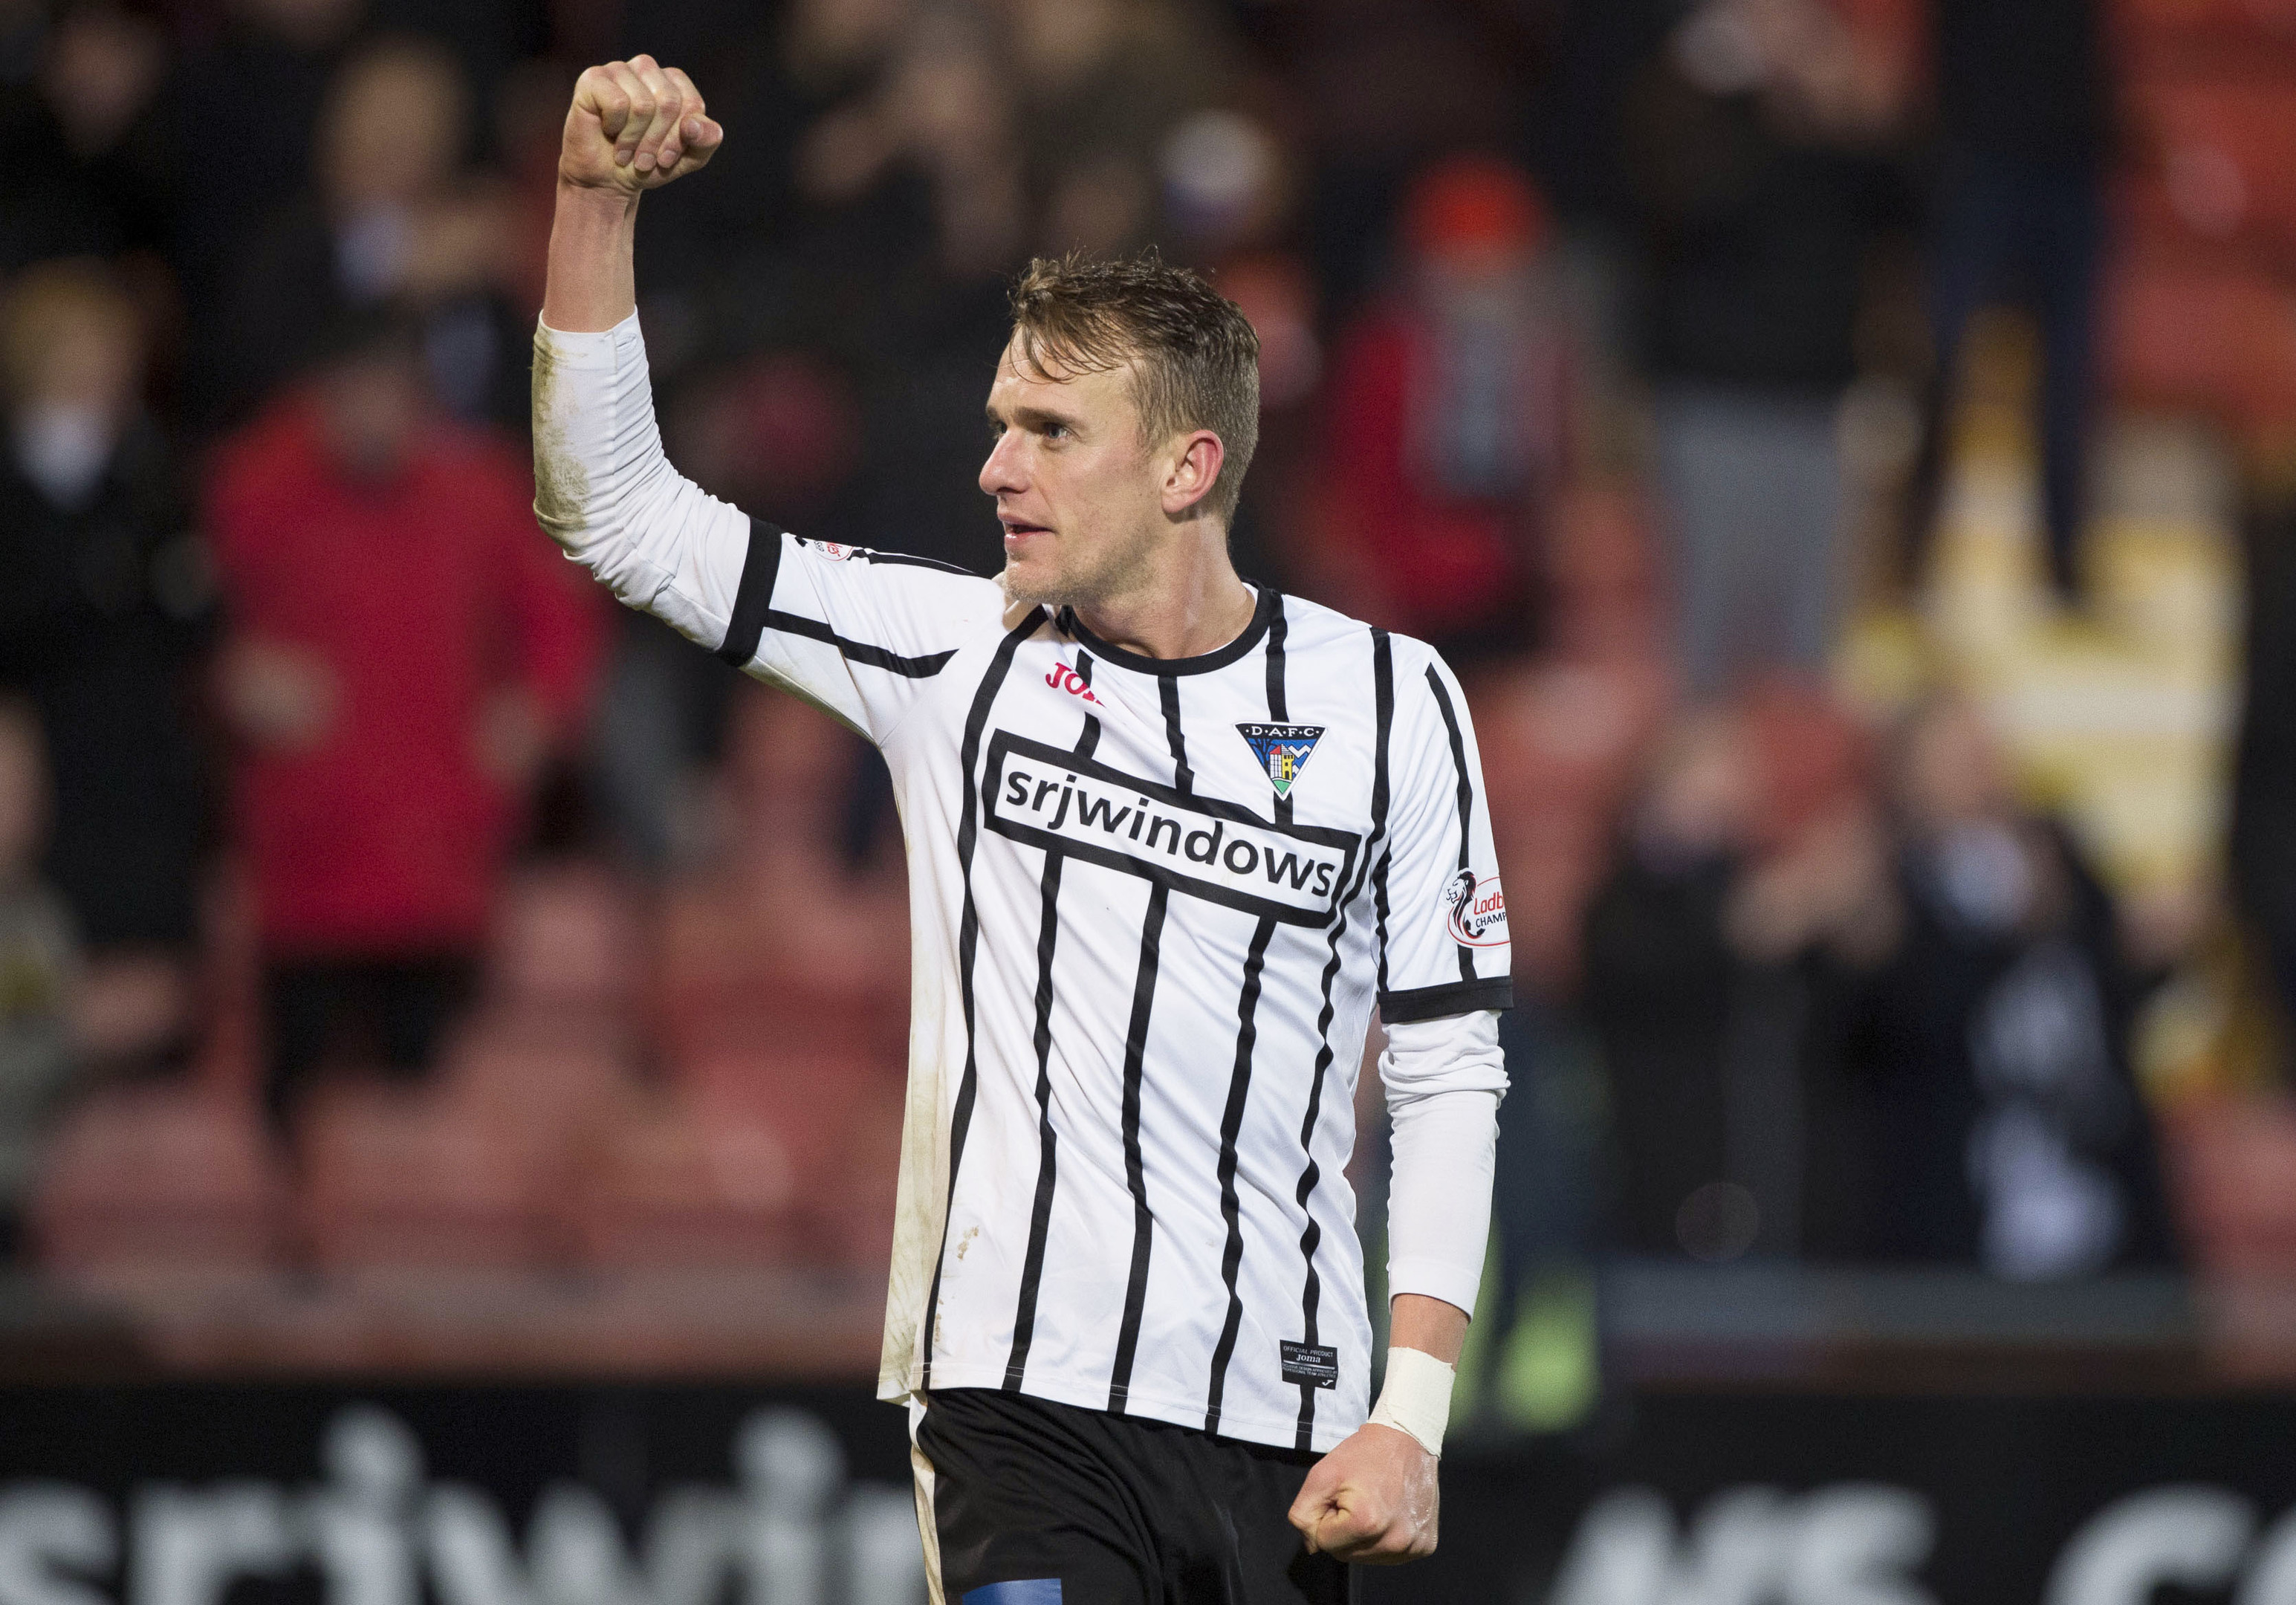 Dunfermline's Dean Shiels at full time after the incident which marred the 2-0 win over Falkirk on January 2.